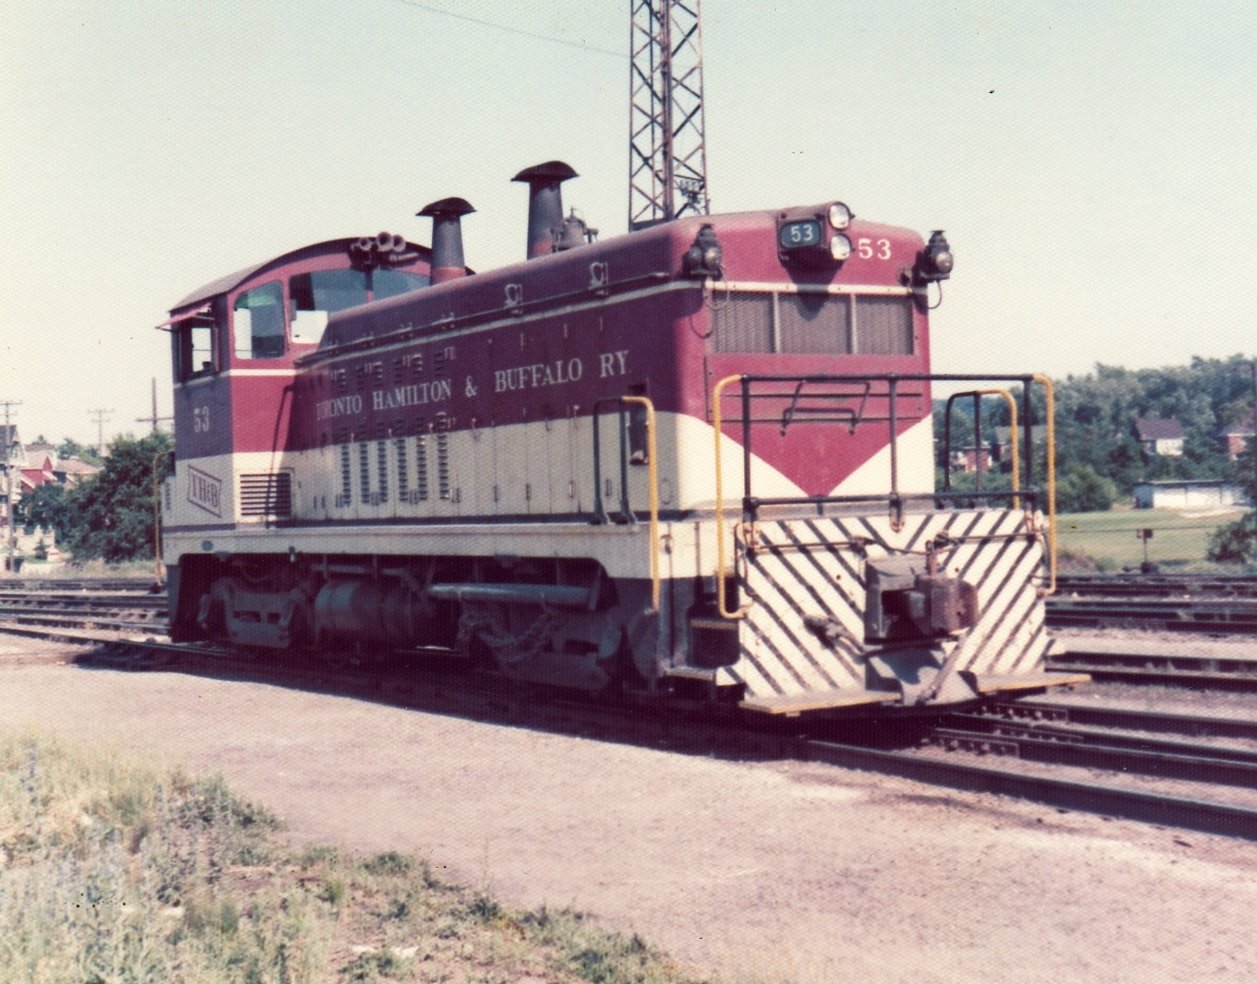 TH&B 53 is an NW-2 from EMD in LaGrange, IL with serial number 5705, built in January of 1948. It was sold to Atlas Specialty Steel in Welland, ON for scrap in May of 1988. I captured it around the Aberdeen Yard complex back in the summer of 1974.